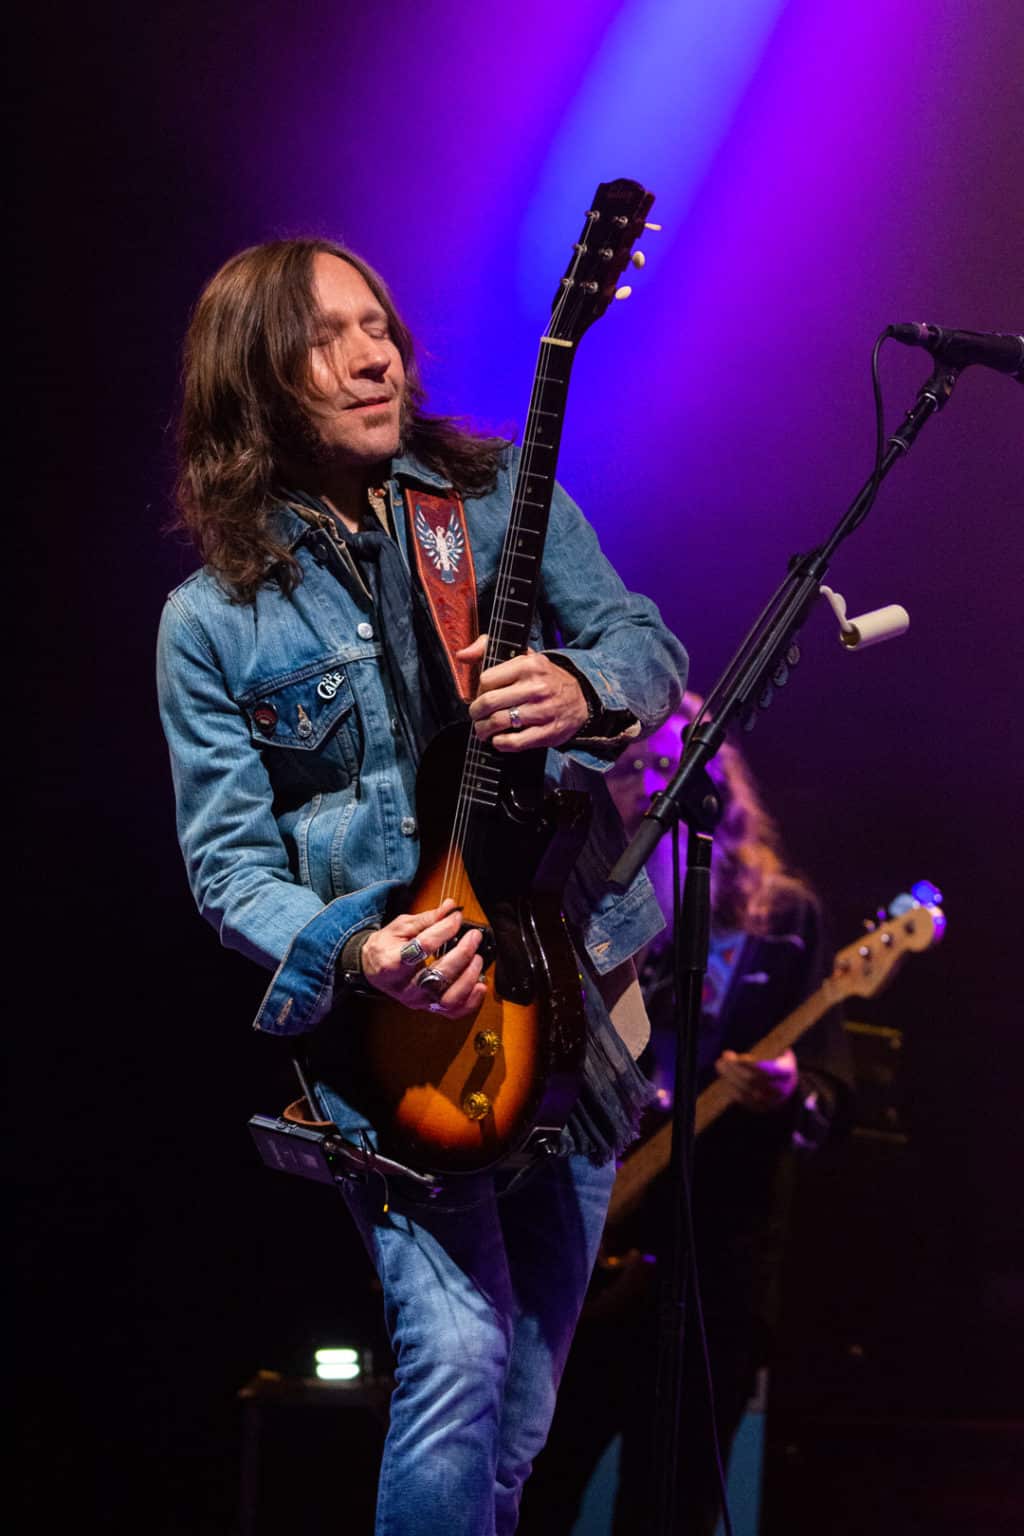 Medium shot of Blackberry Smoke smiling with eyes closed while playing an electric guitar with purple lights shining in the background